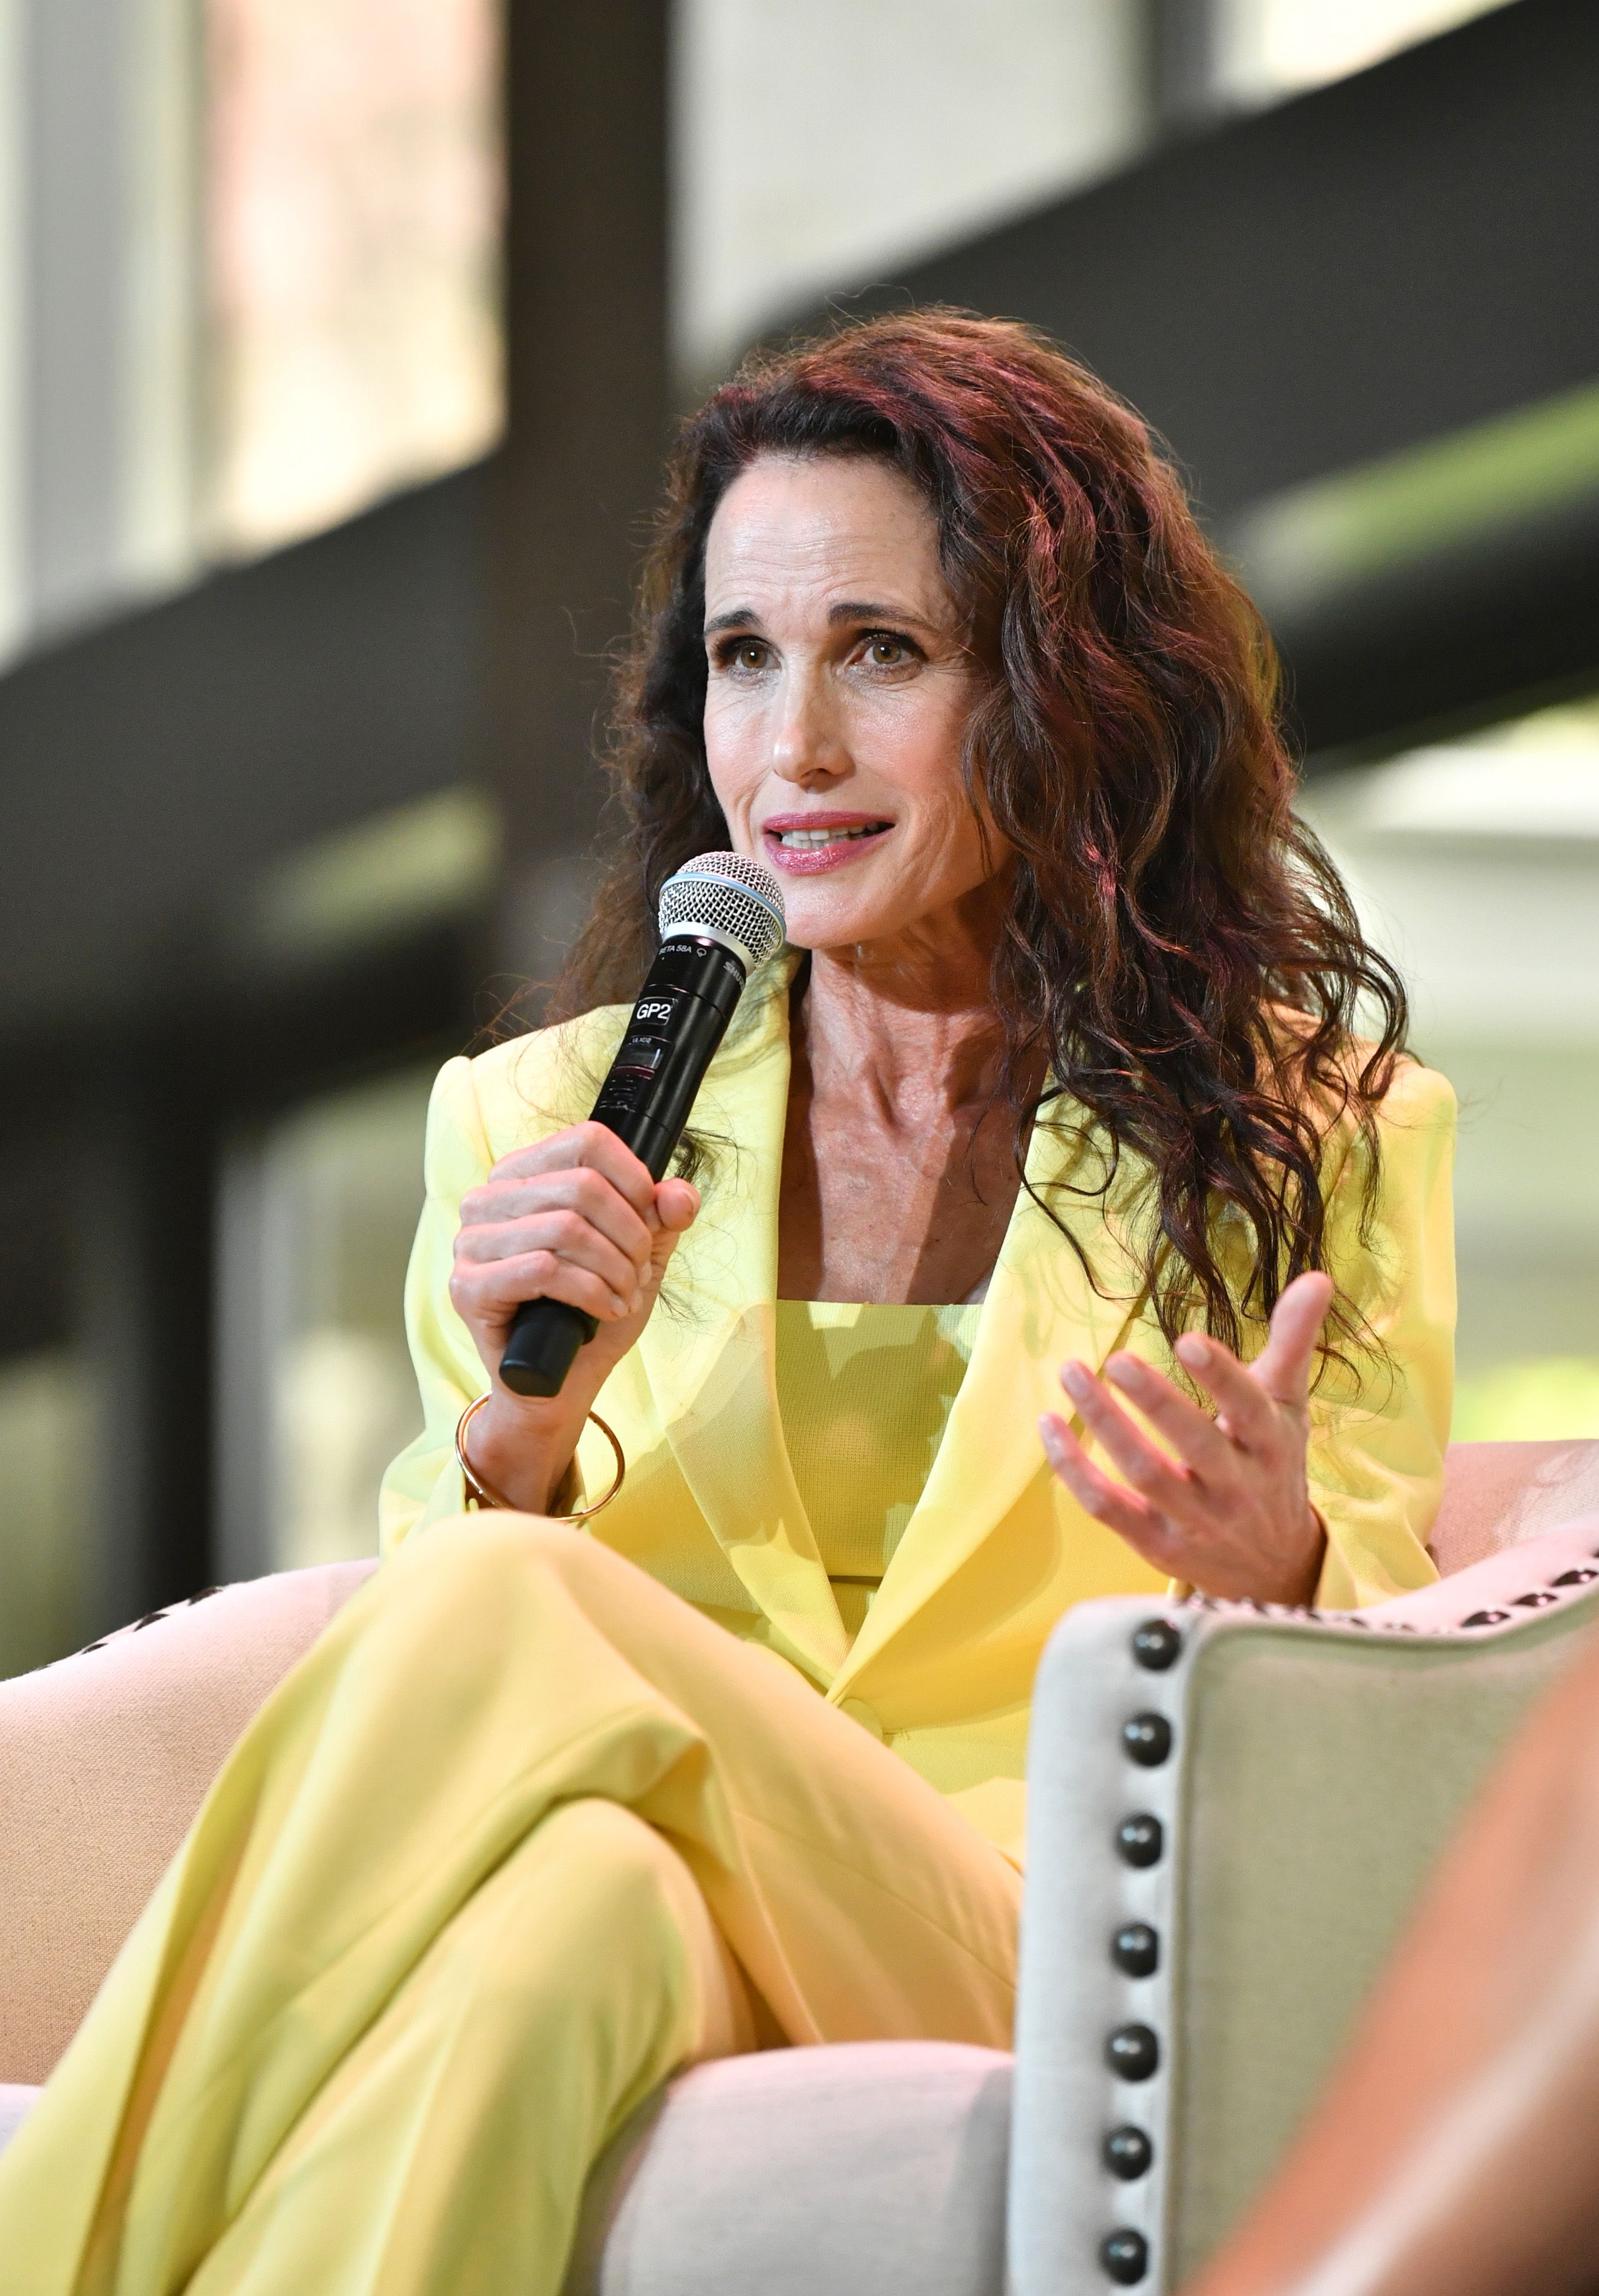 Andie MacDowell talks at the National Women's History Museum's 8th Annual Women Making History Awards on March 8, 2020 in Los Angeles, California. | Source: Getty Images